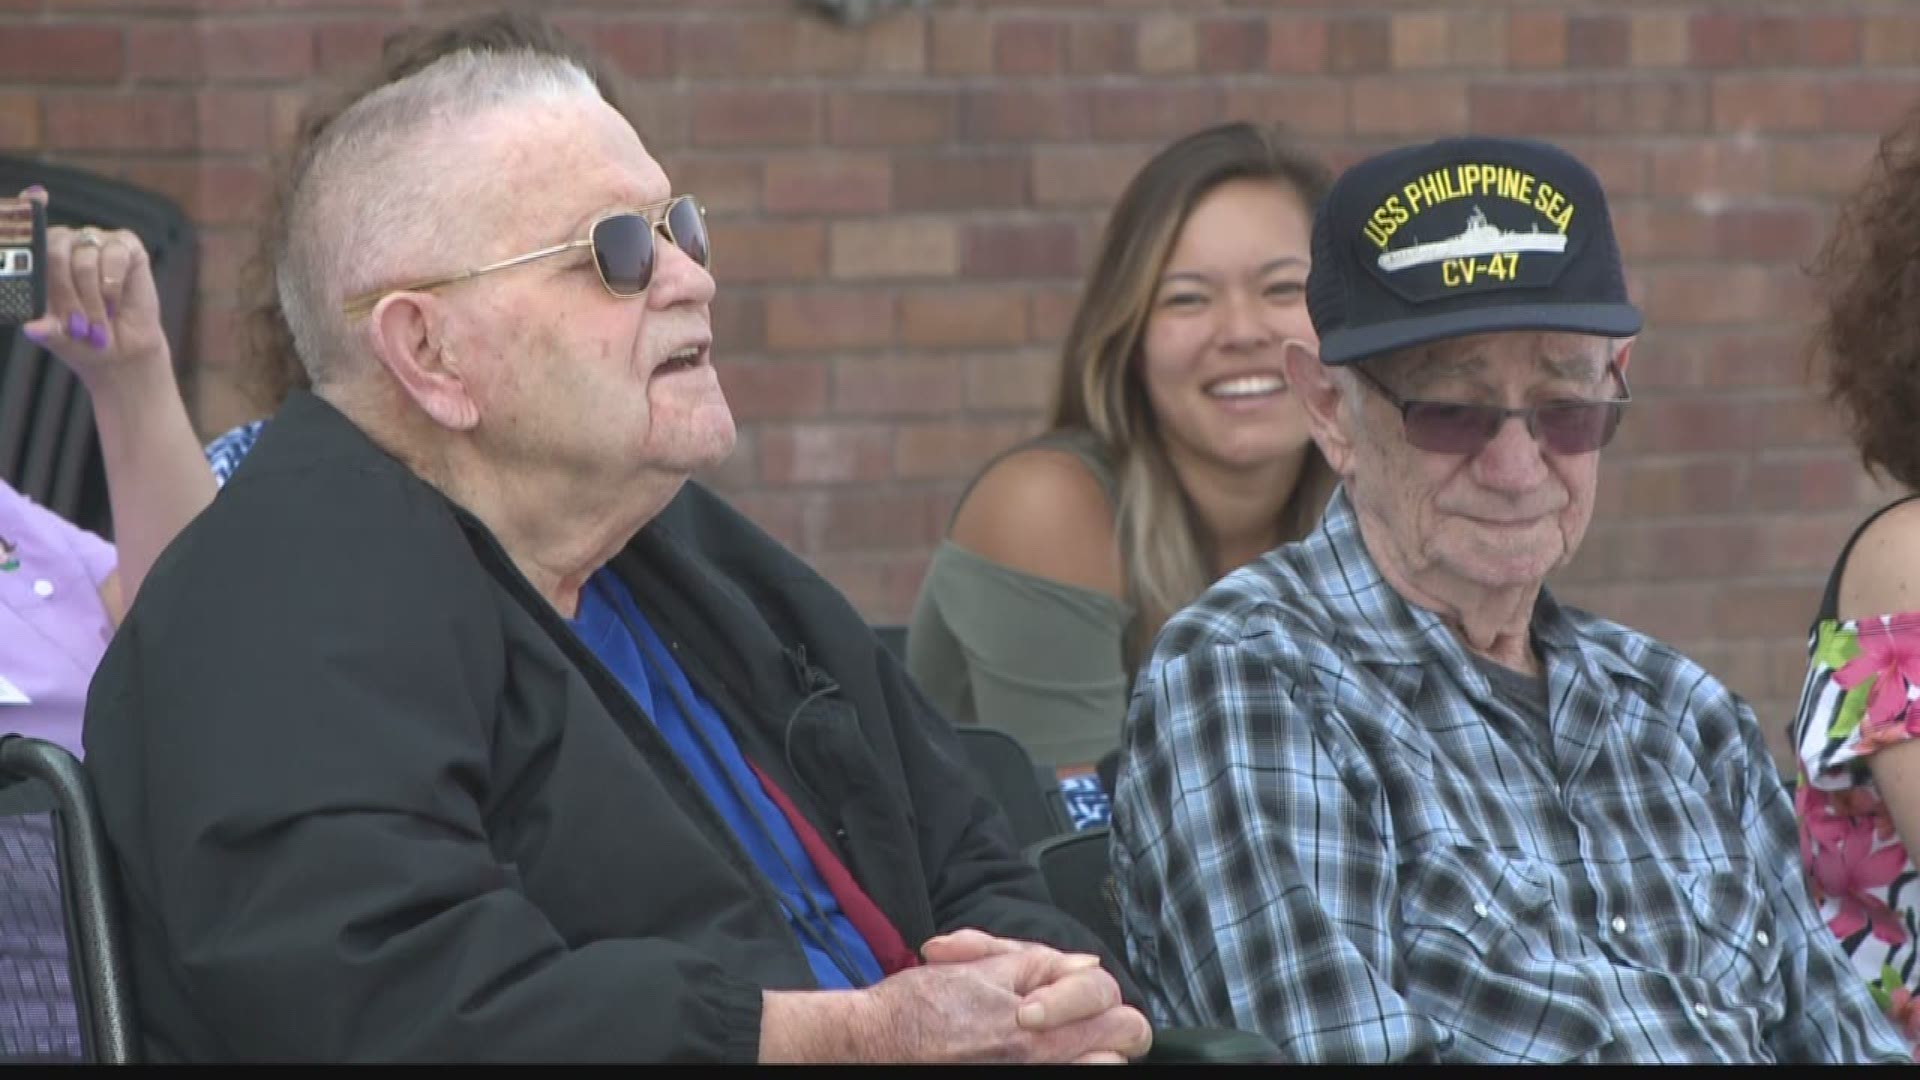 Two local veterans were honored for their service with a special flight out of Felts Field. One of those men was just 15-years-old when he was sent to war. Decades later, he was taken on a flight to celebrate his dedication to country. Laura Papetti repor